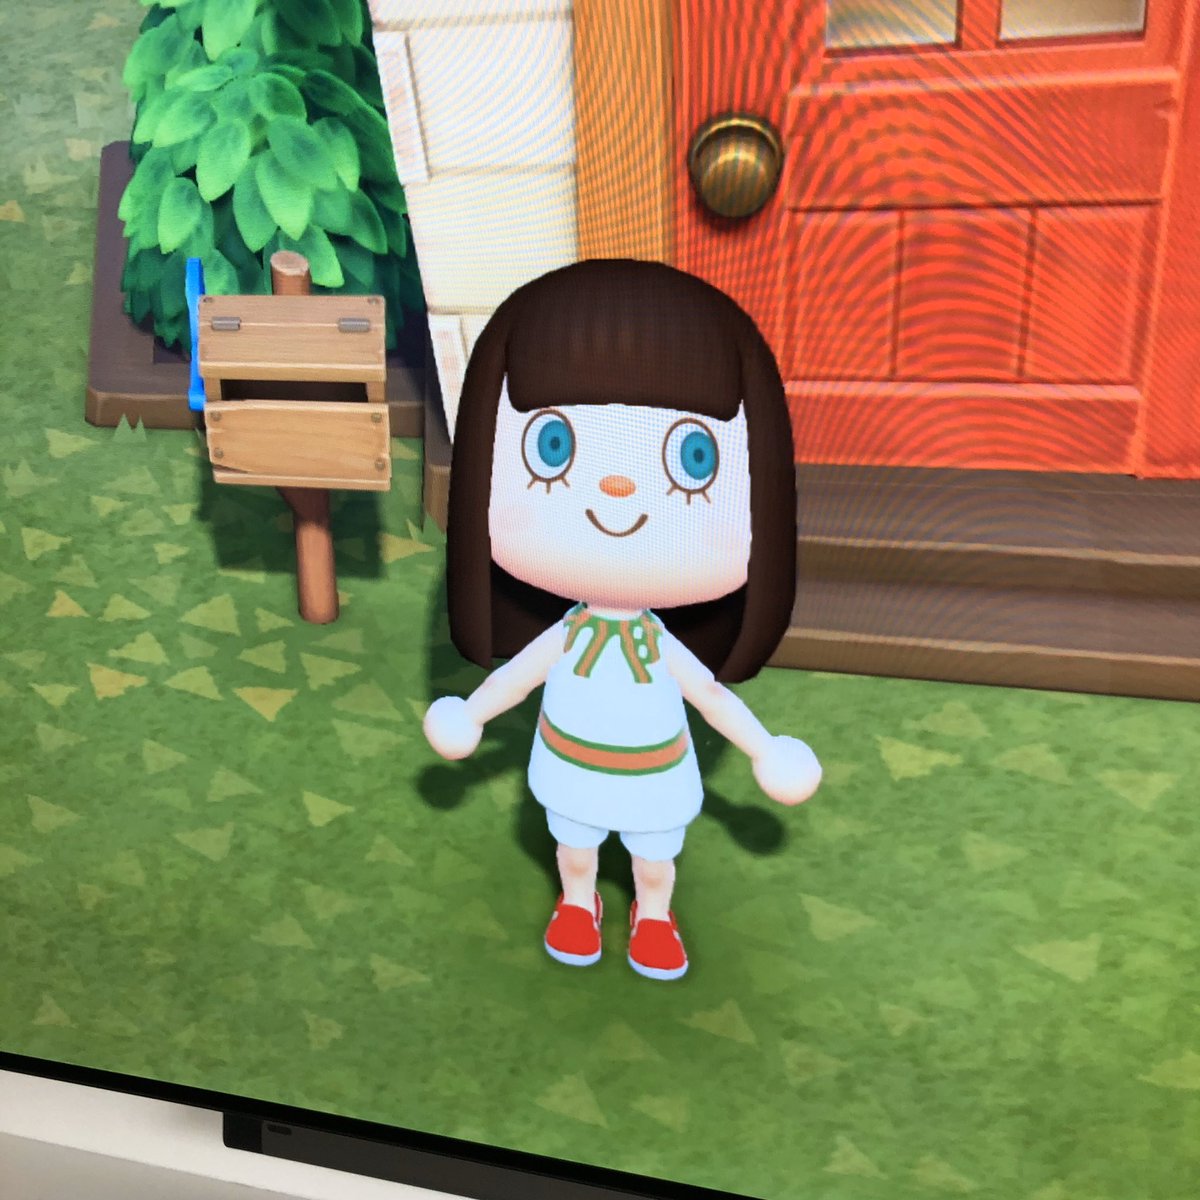 Fvnuidugrvthkm - growing up in roblox denis roblox girl outfit codes 2019